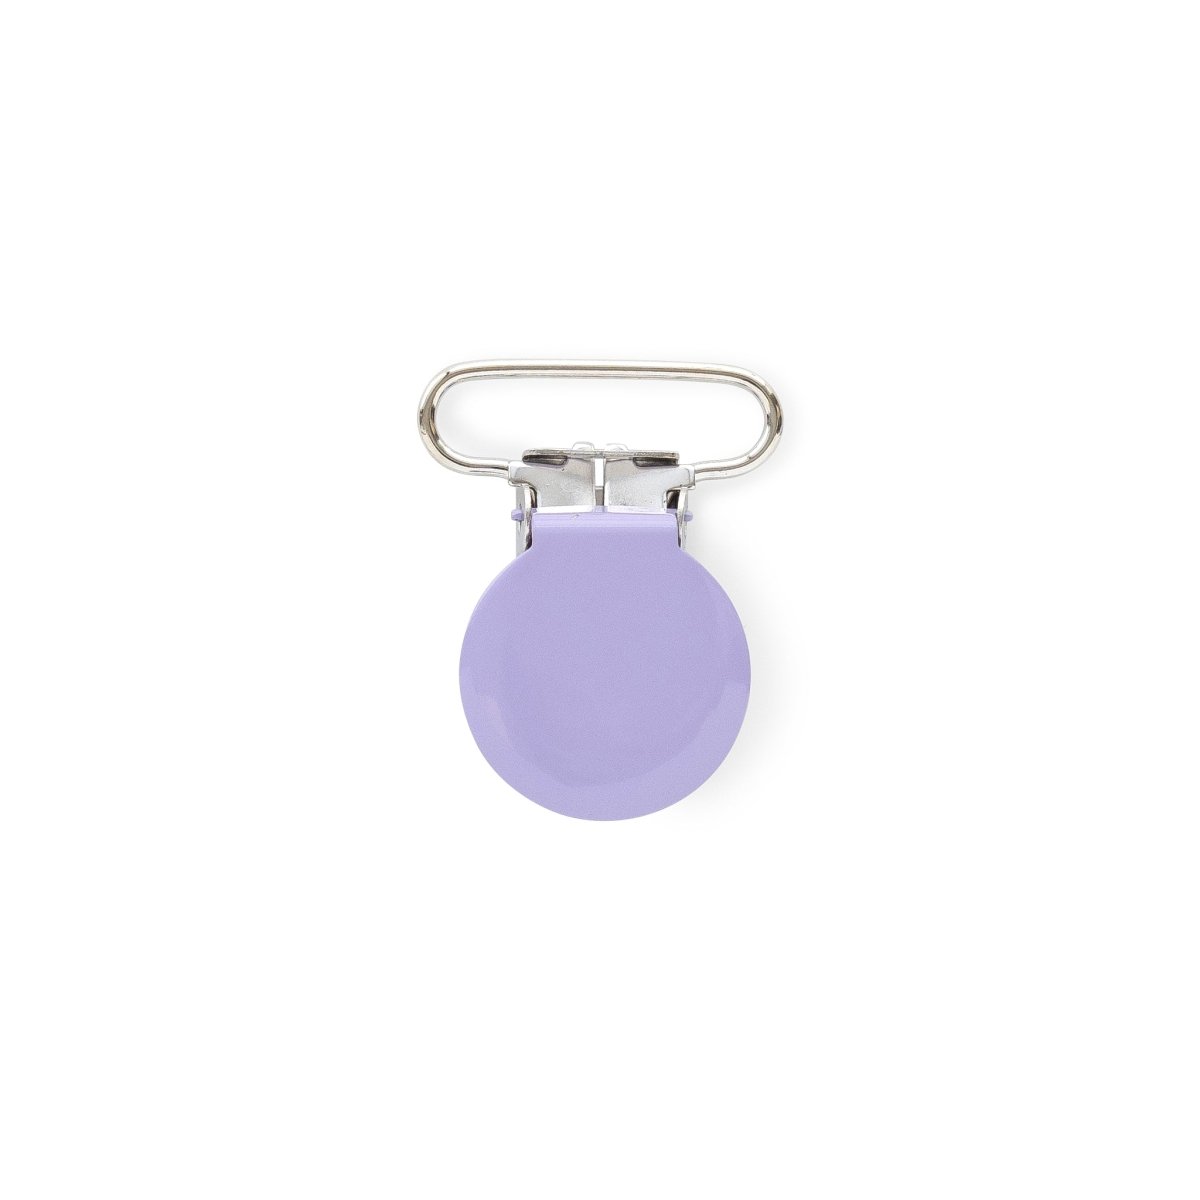 Clips Metal Rounds Lavender from Cara & Co Craft Supply